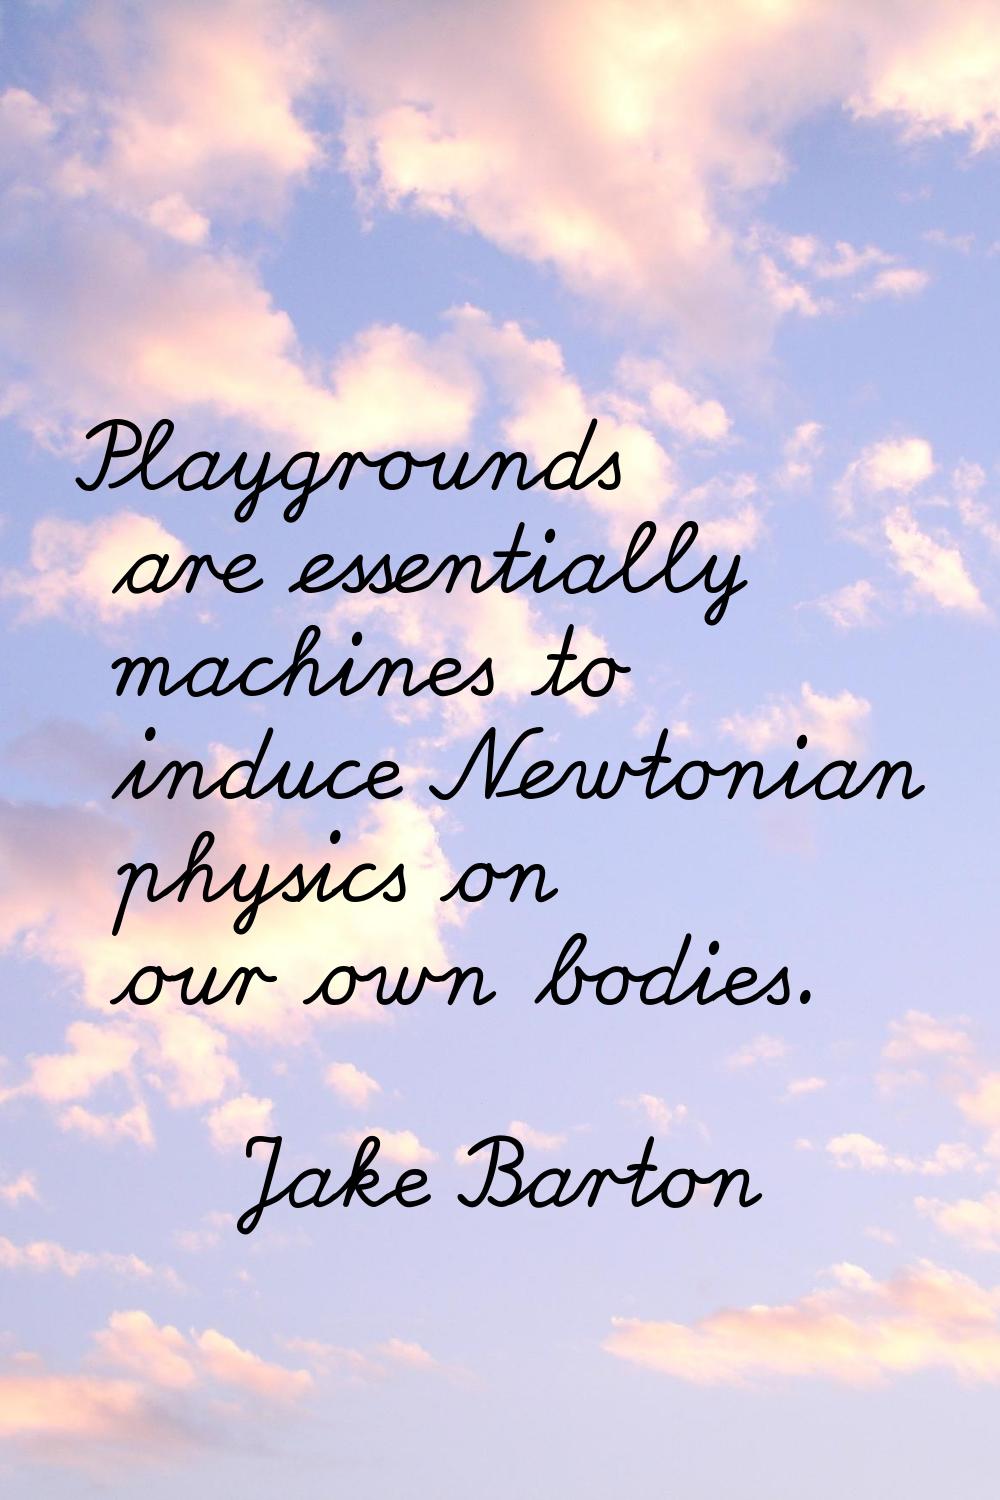 Playgrounds are essentially machines to induce Newtonian physics on our own bodies.